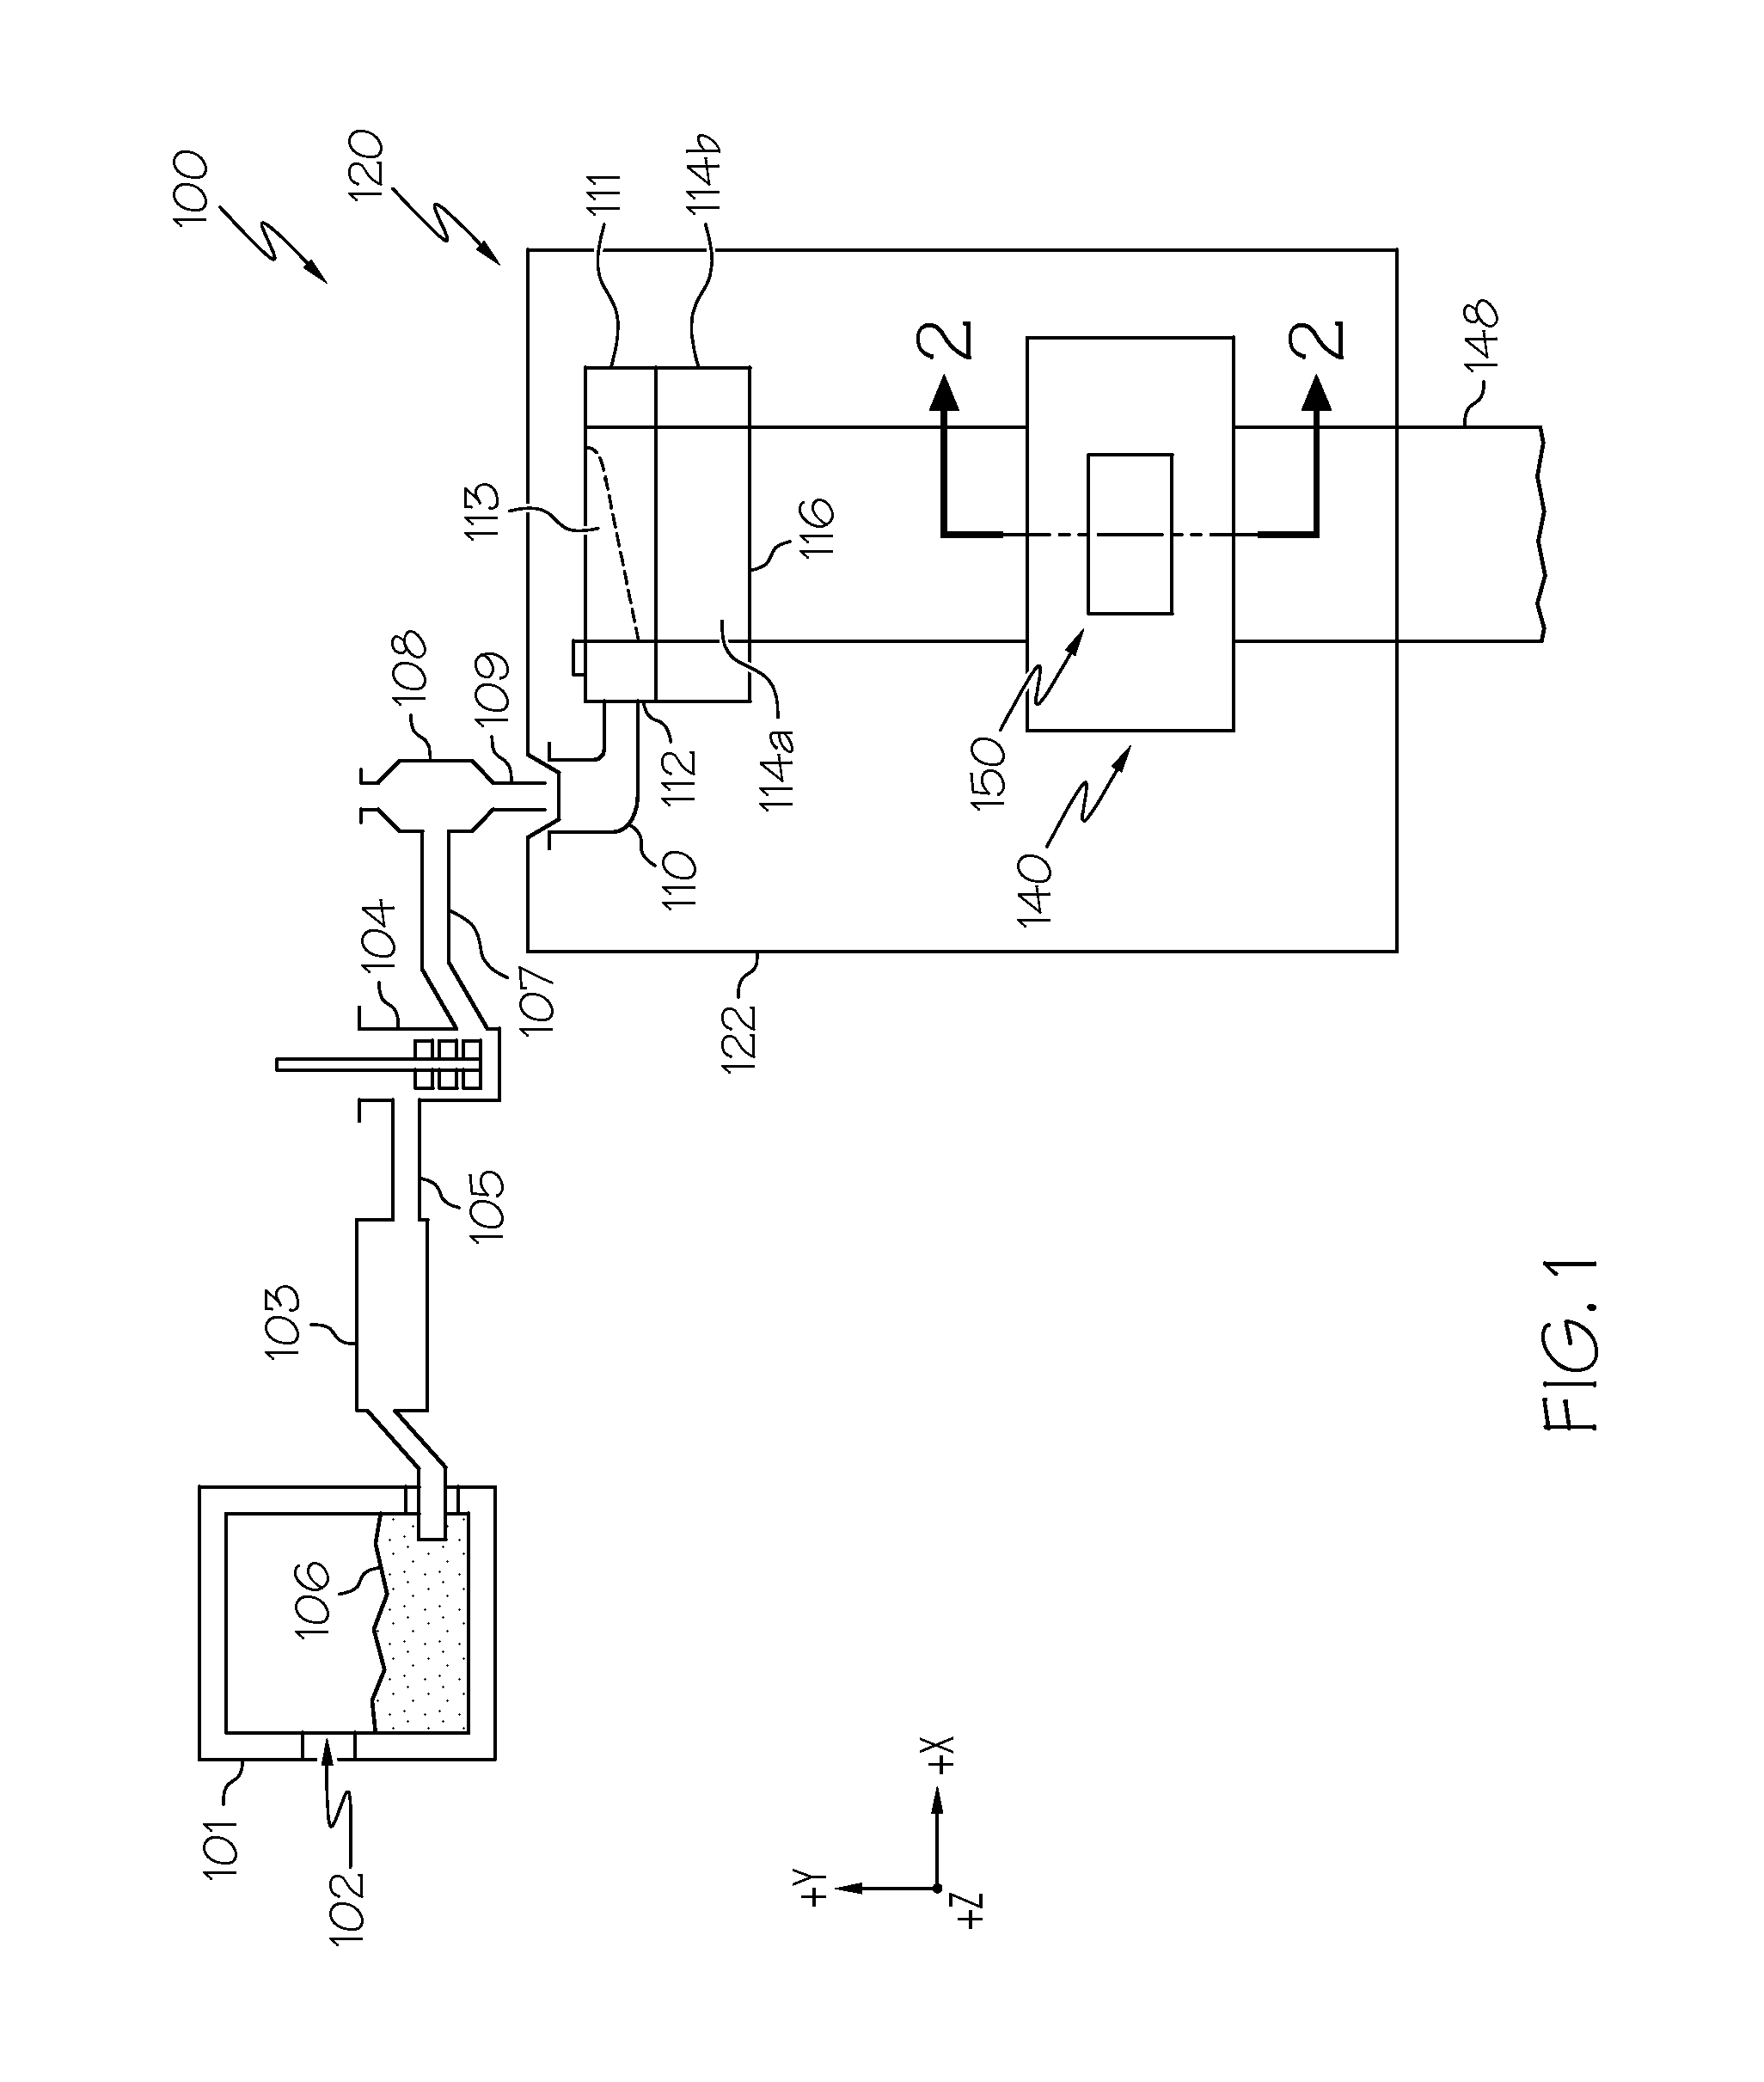 Glass manufacturing apparatuses with particulate removal devices and methods of using the same